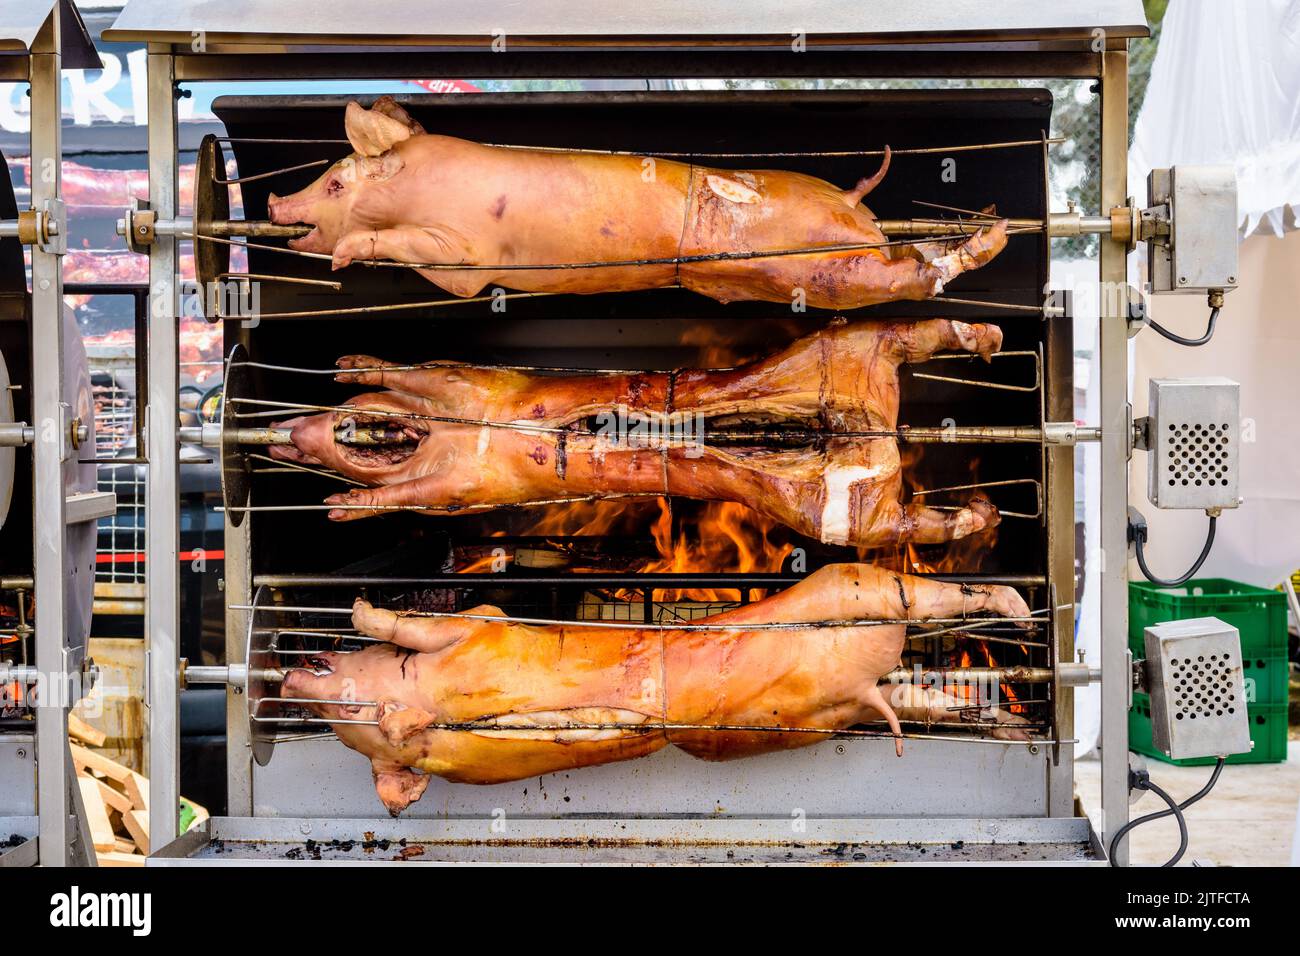 Front view of three pigs roasting on a spit in a rotisserie. Stock Photo